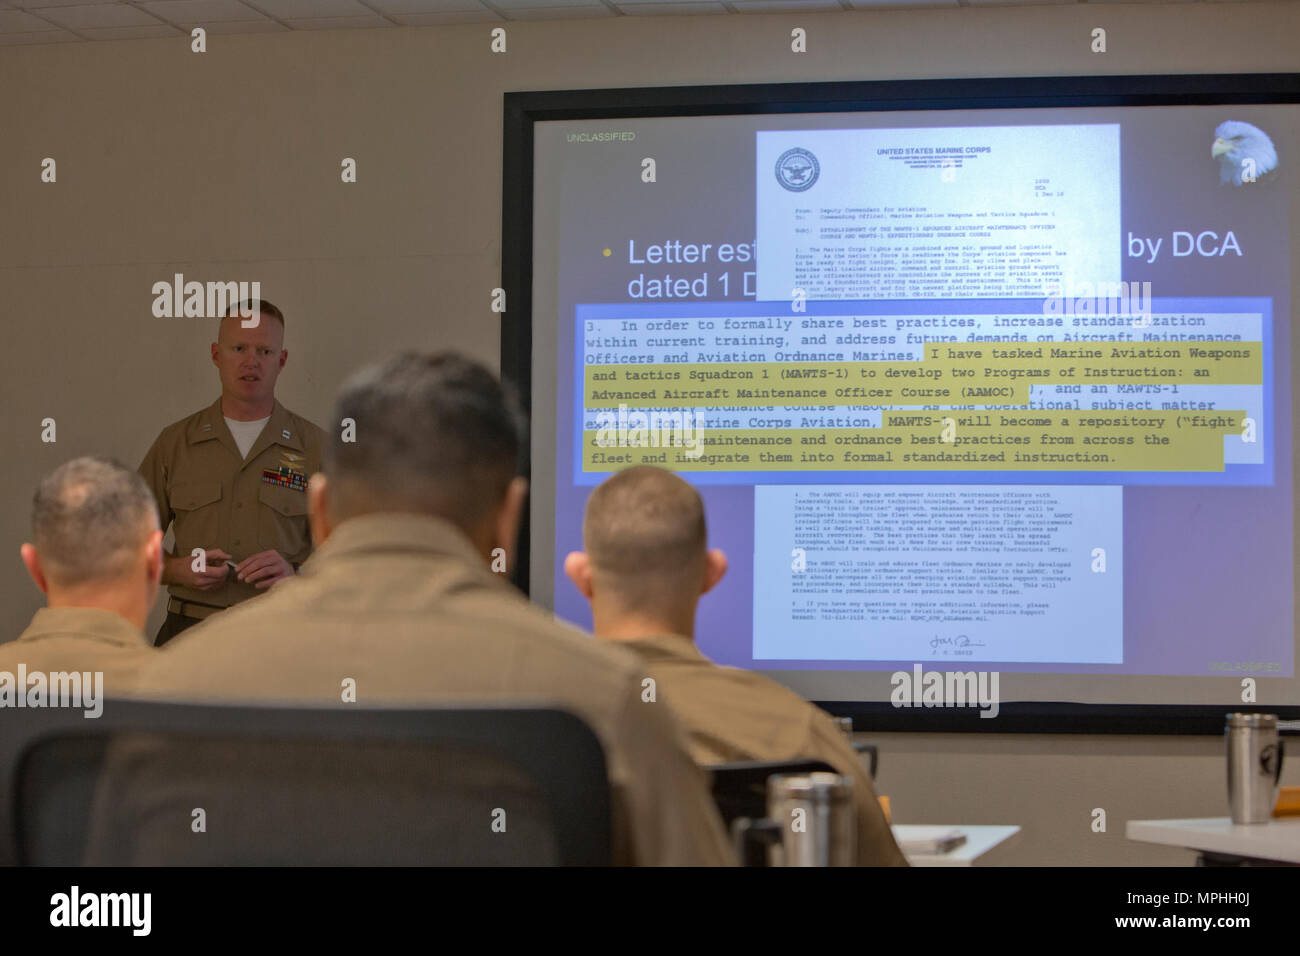 U.S. Marine Capt. Scott L. Campbell, maintenance officer with Marine Aviation Weapons and Tactics Squadron One (MAWTS-1) welcomes students attending the first ever Advanced Aircraft Maintenance Officer Course (AAMOC) at Marine Corps Air Station Yuma, Ariz., on Mar. 13, 2017. AAMOC will empower Aircraft Maintenance Officers with leadership tools, greater technical knowledge, and standardized practices through rigorous academics and hands on training in order to decrease ground related mishaps and increase sortie generation. (U.S. Marine Corps photo taken by Cpl. AaronJames B. Vinculado) Stock Photo